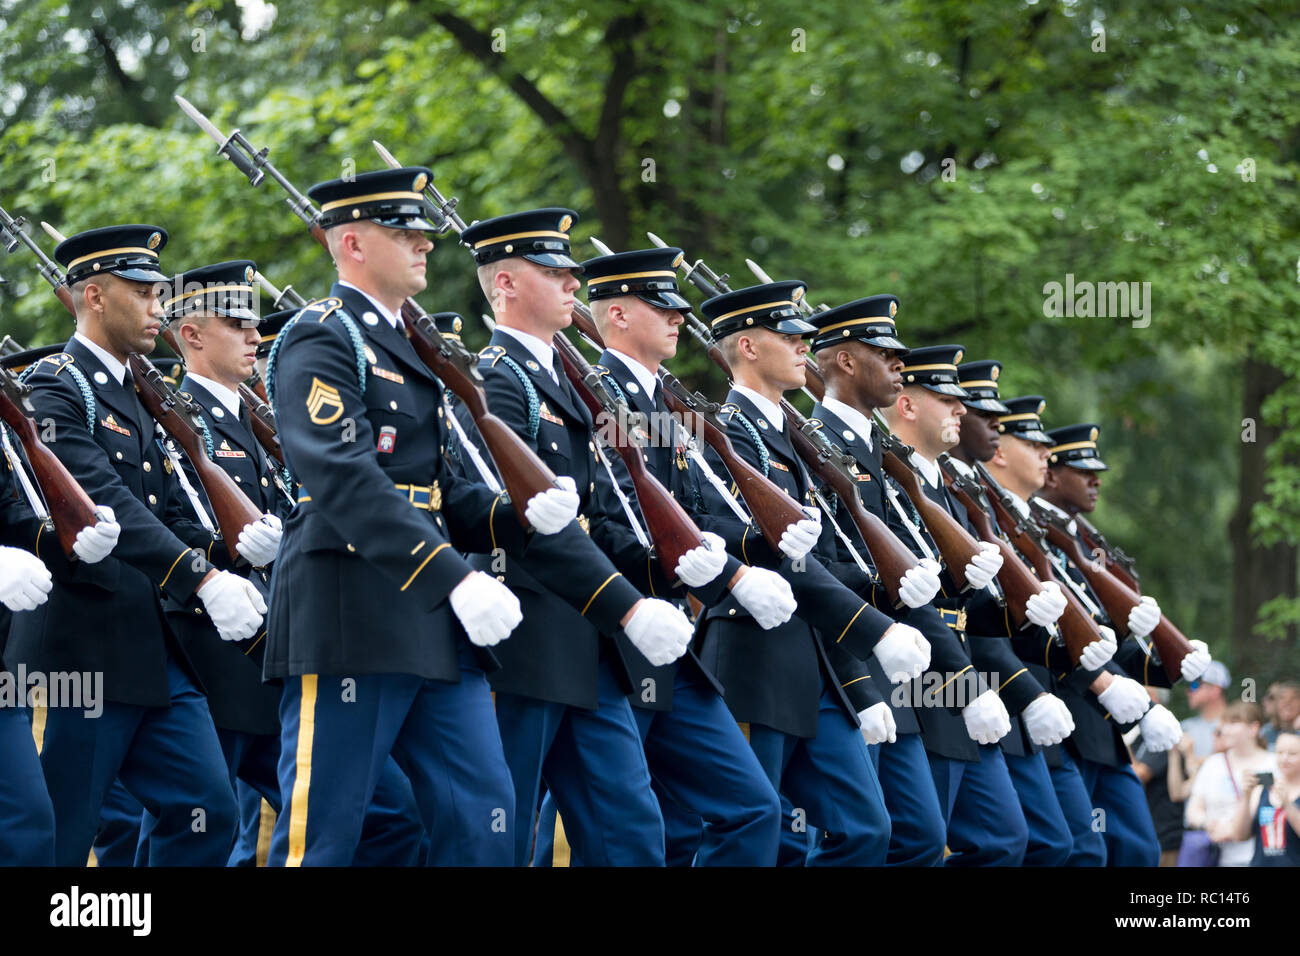 Washington, D.C., USA - July 4, 2018, Members of the US Army carrying rifles marching at the National Independence Day Parade Stock Photo